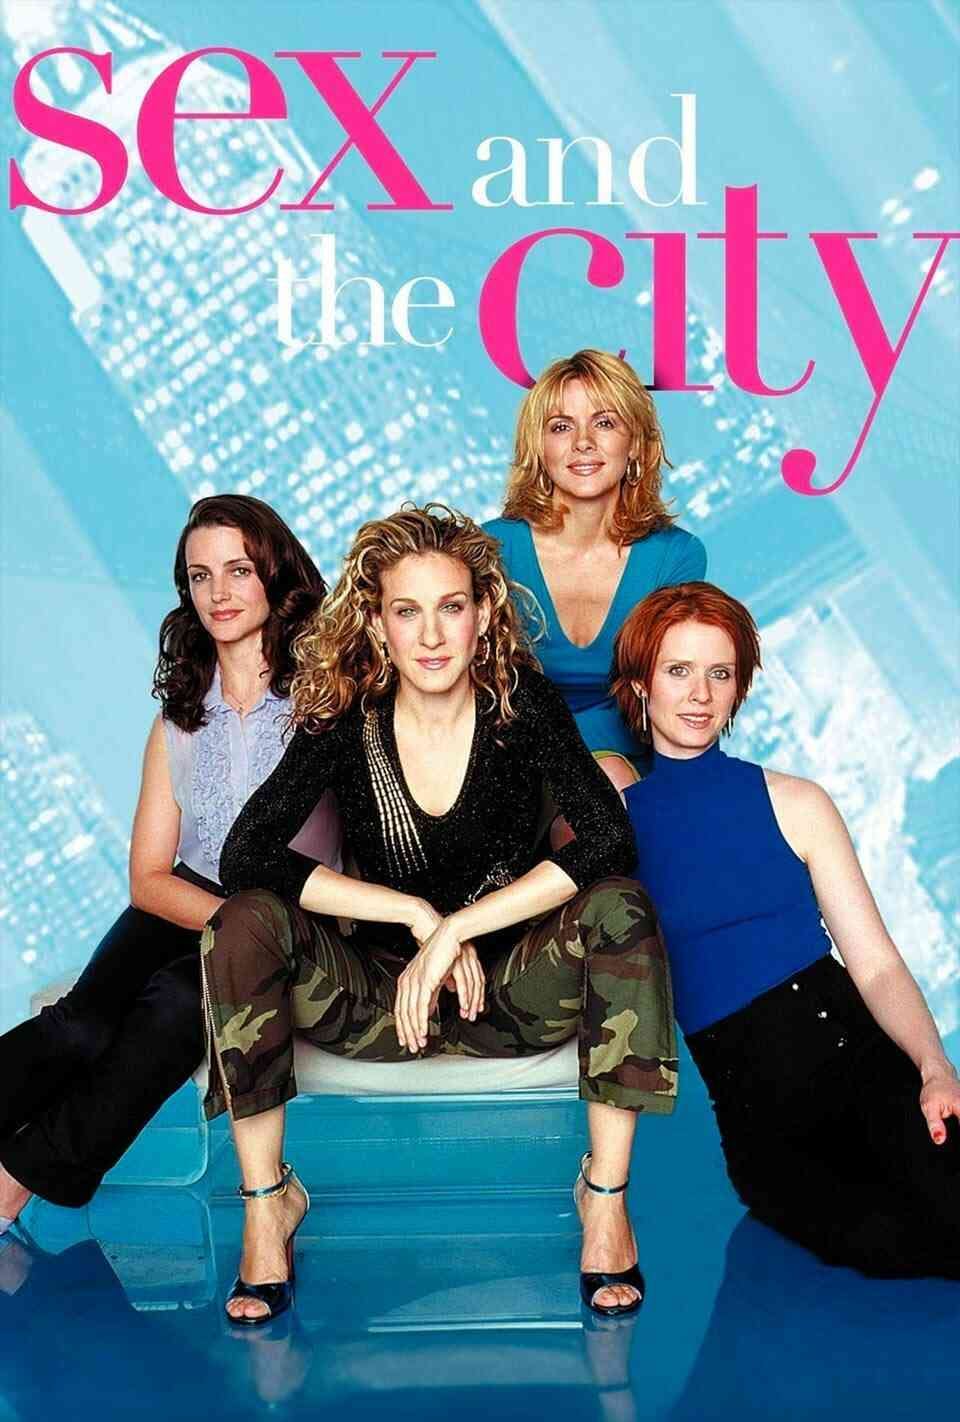 Read Sex and the City screenplay.